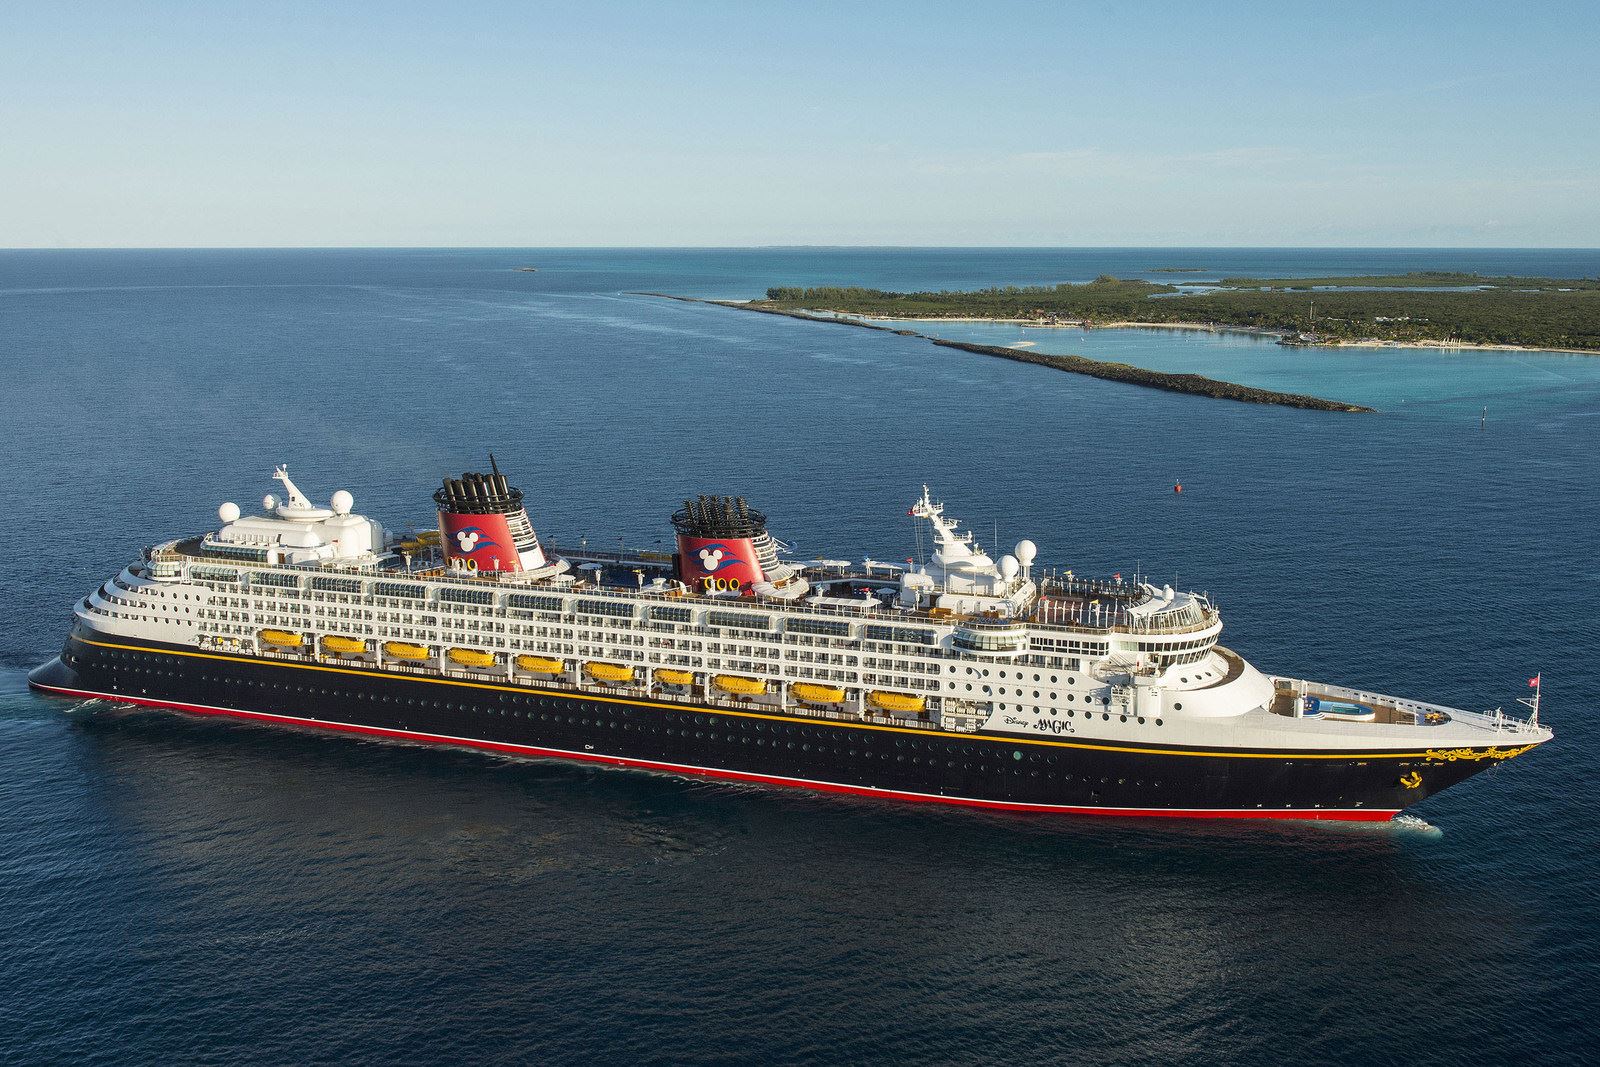 Disney Cruise Line’s 2019 Sailings Include New York Departures